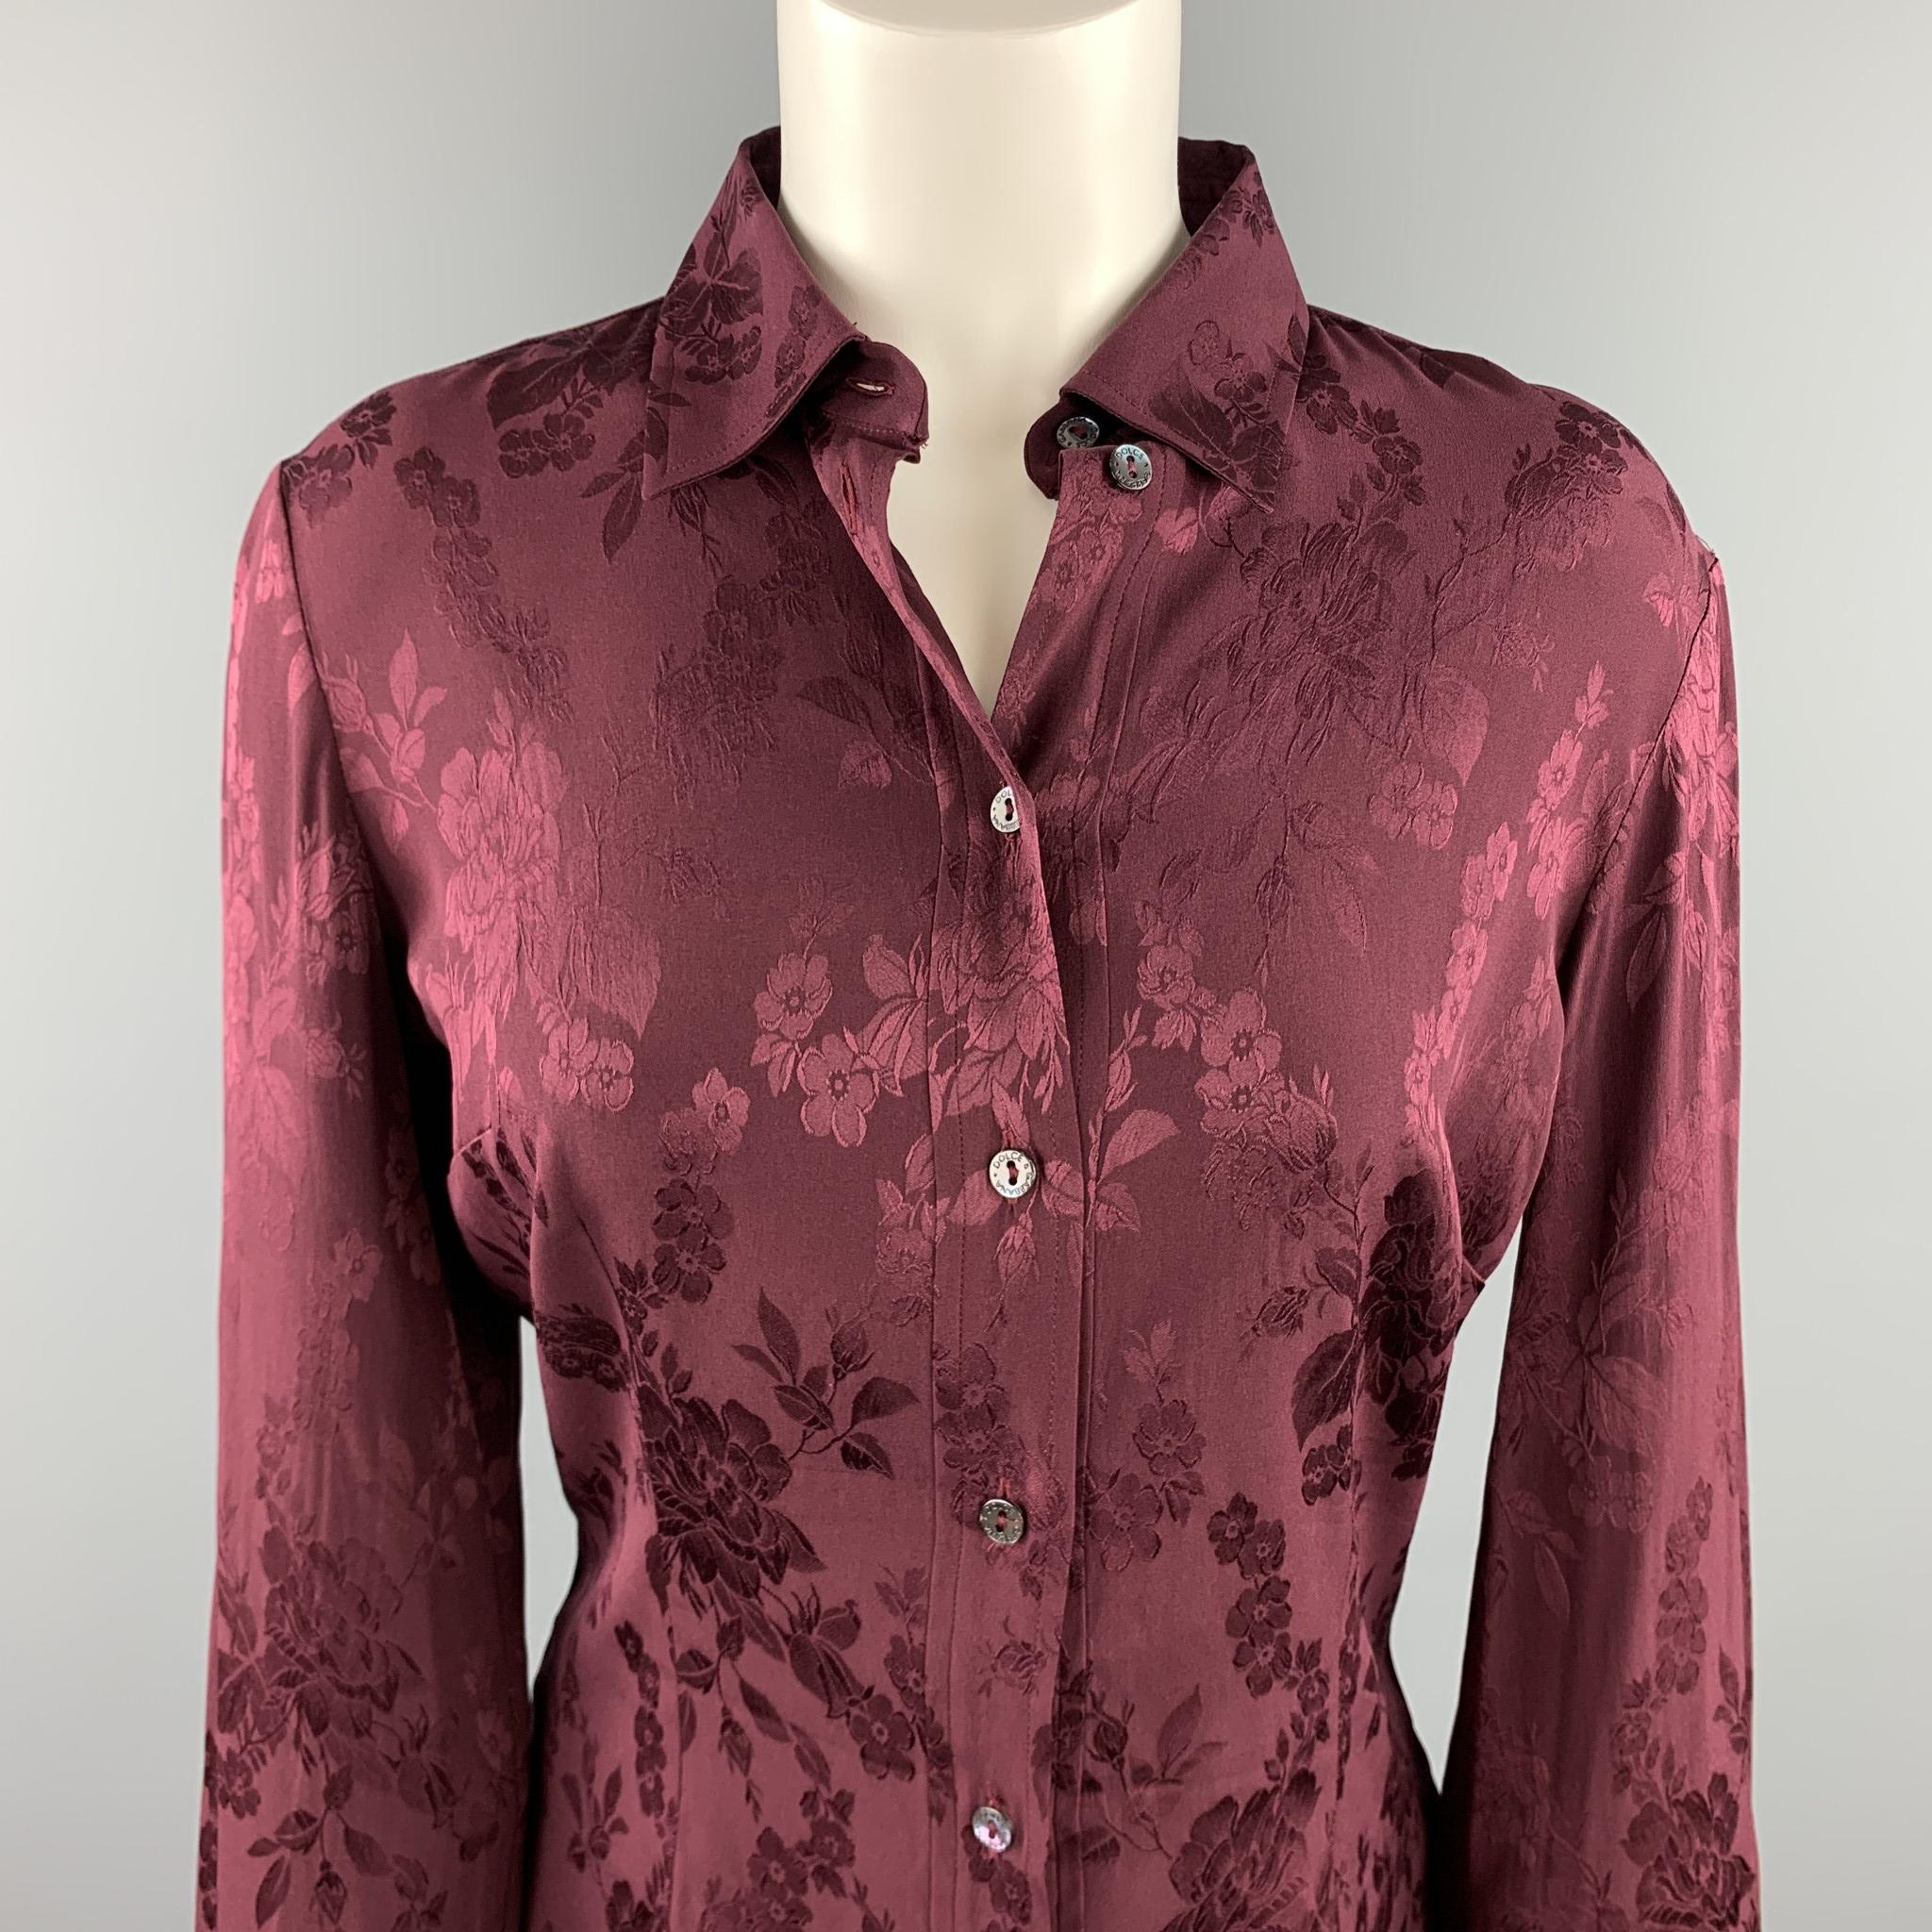 DOLCE & GABBANA blouse comes in a burgundy jacquard floral fabric featuring long sleeves, spread collar, and a buttoned closure. Made in Italy.

Very Good Pre-Owned Condition.
Marked: No size marked

Measurements:

Shoulder: 16 in. 
Bust: 37 in.